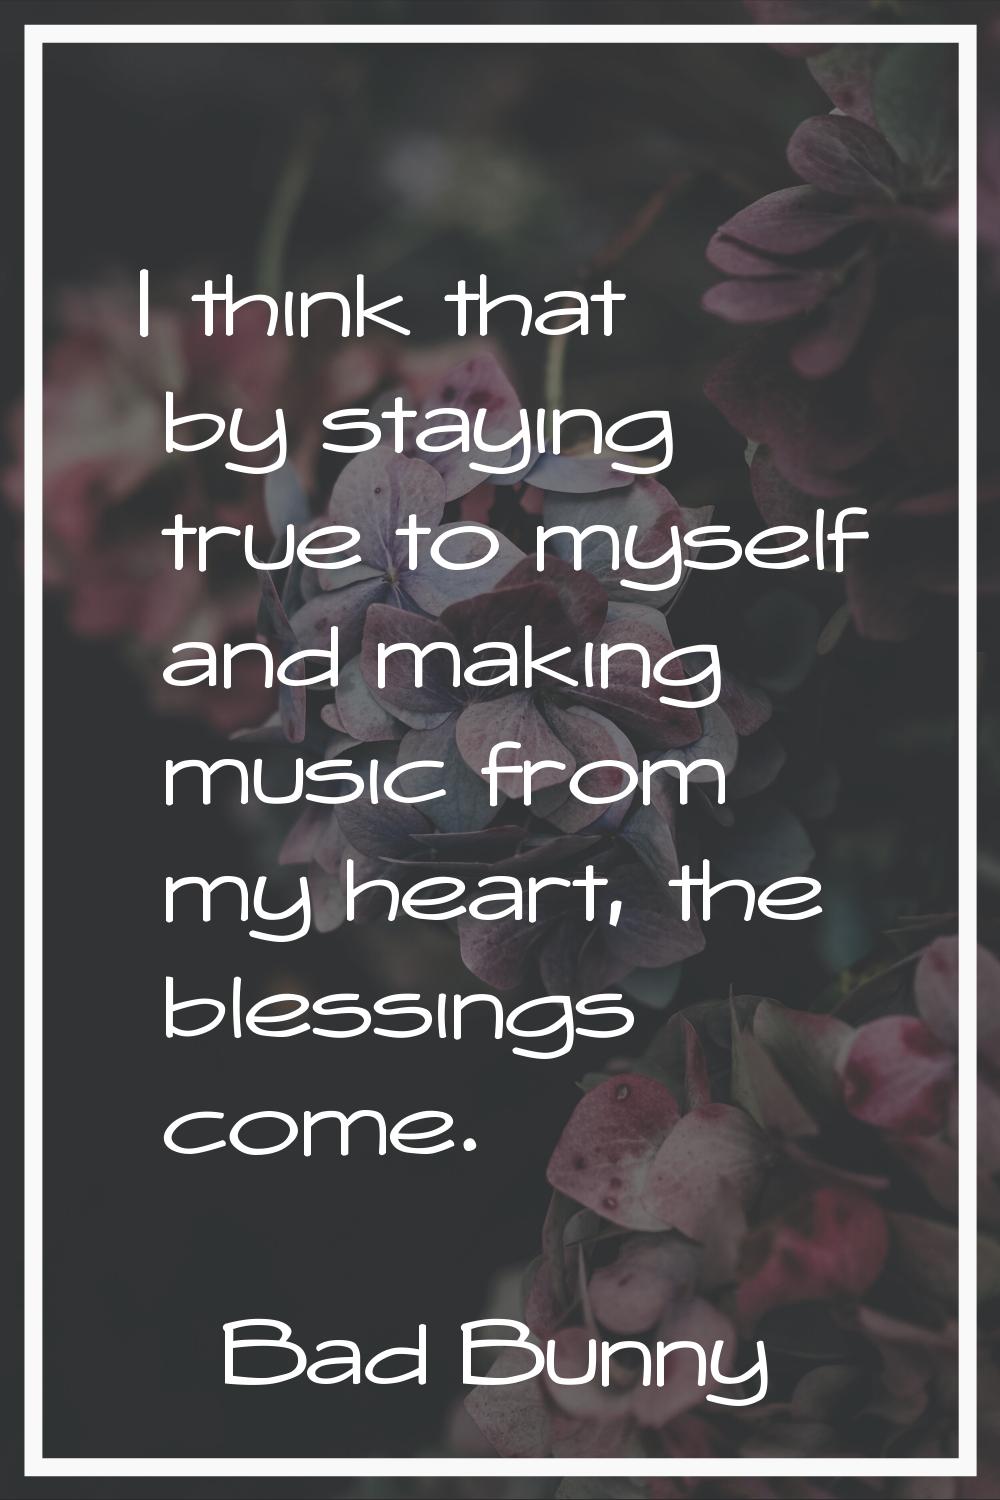 I think that by staying true to myself and making music from my heart, the blessings come.